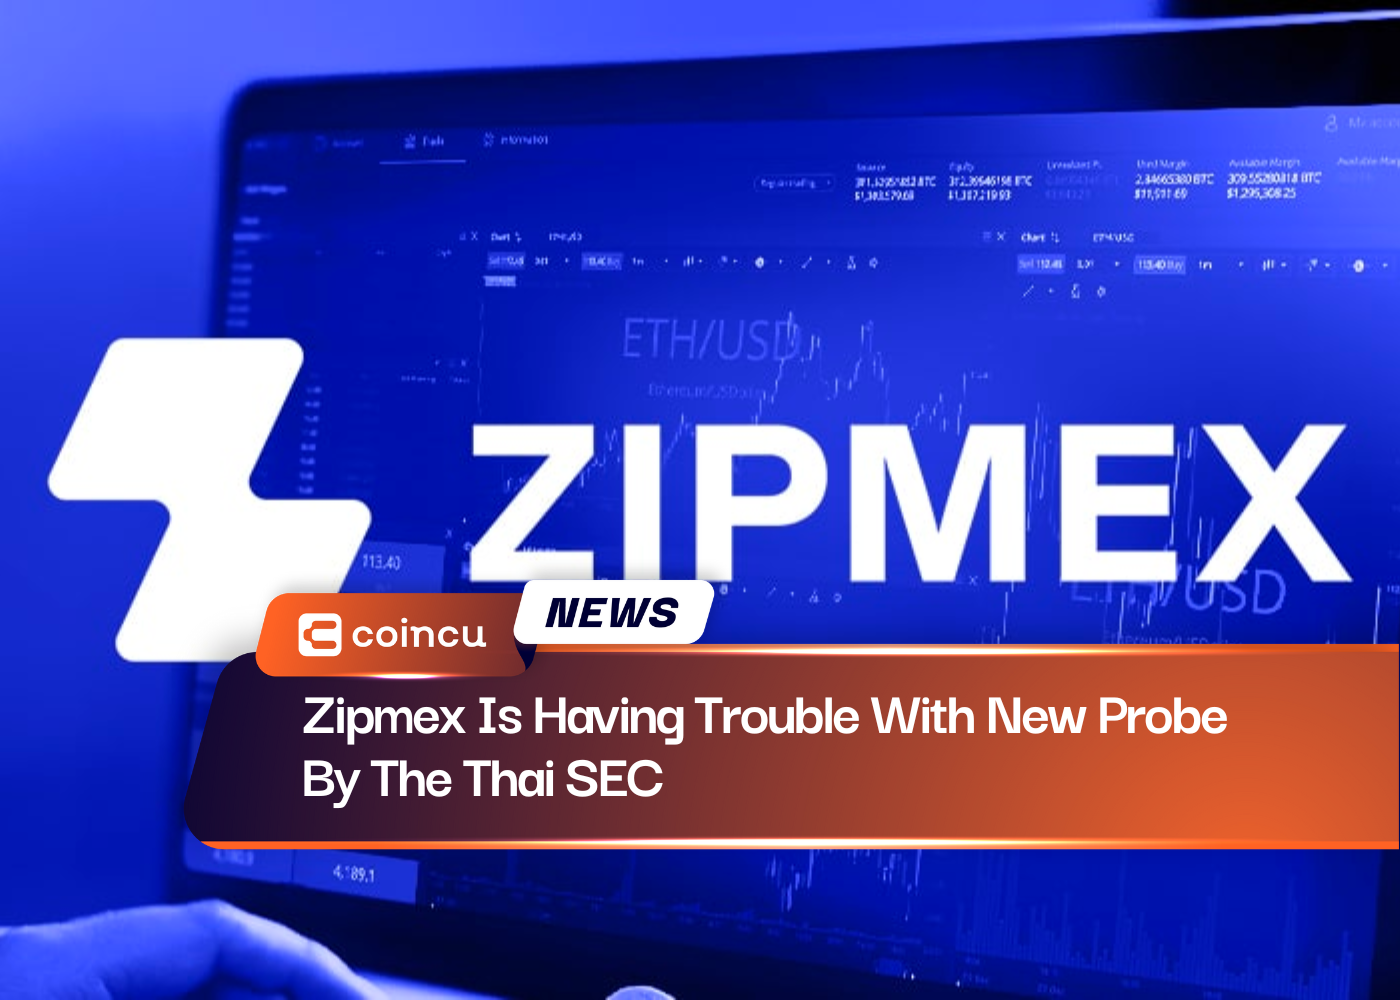 Zipmex Is Having Trouble With New Probe By The Thai SEC